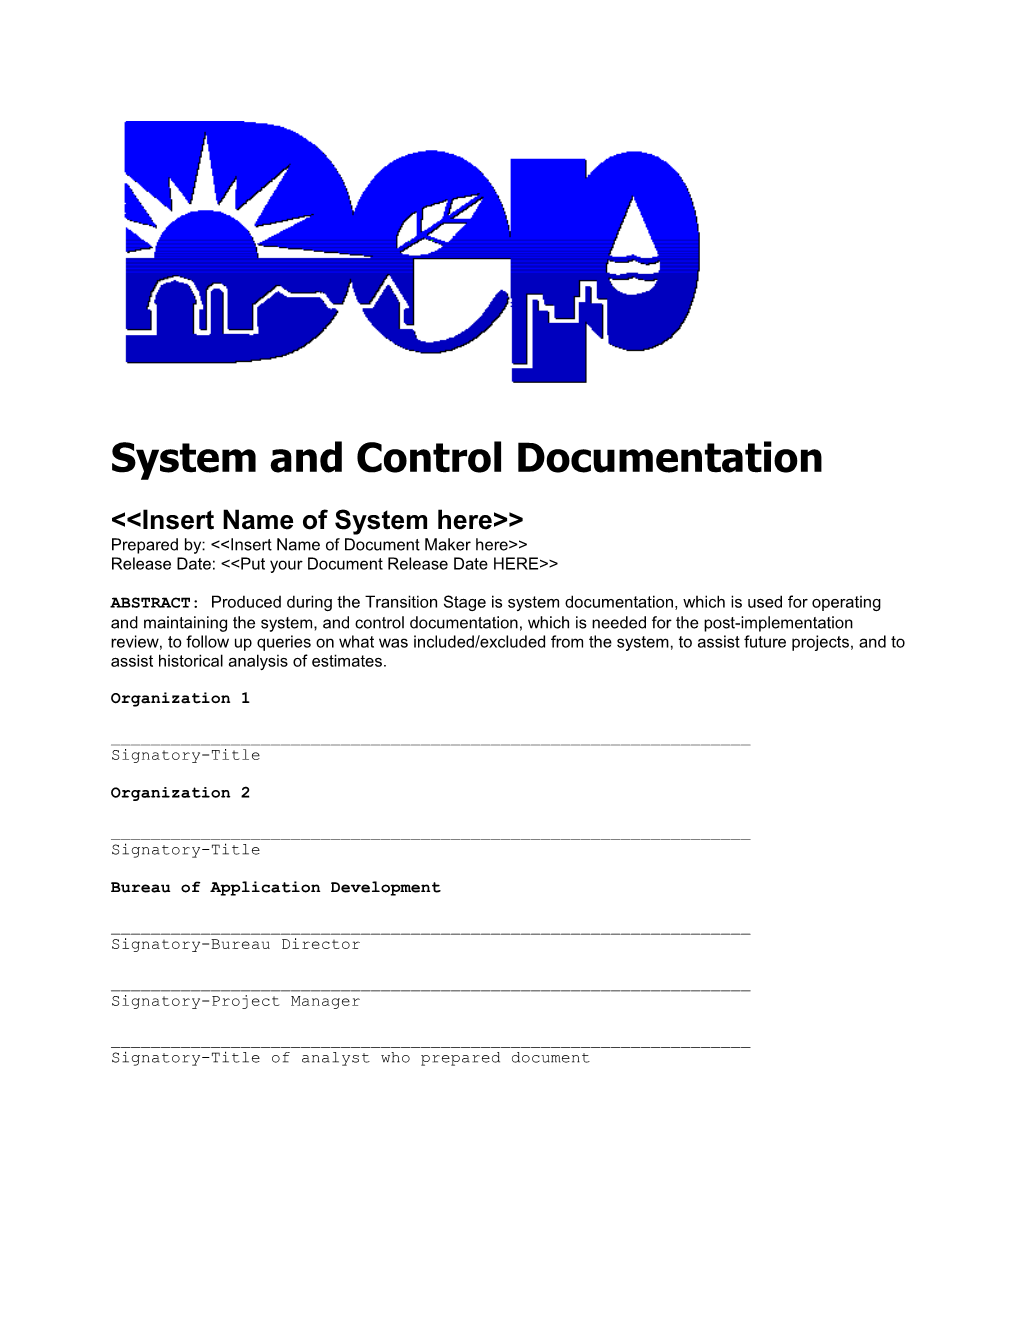 System and Control Documentation